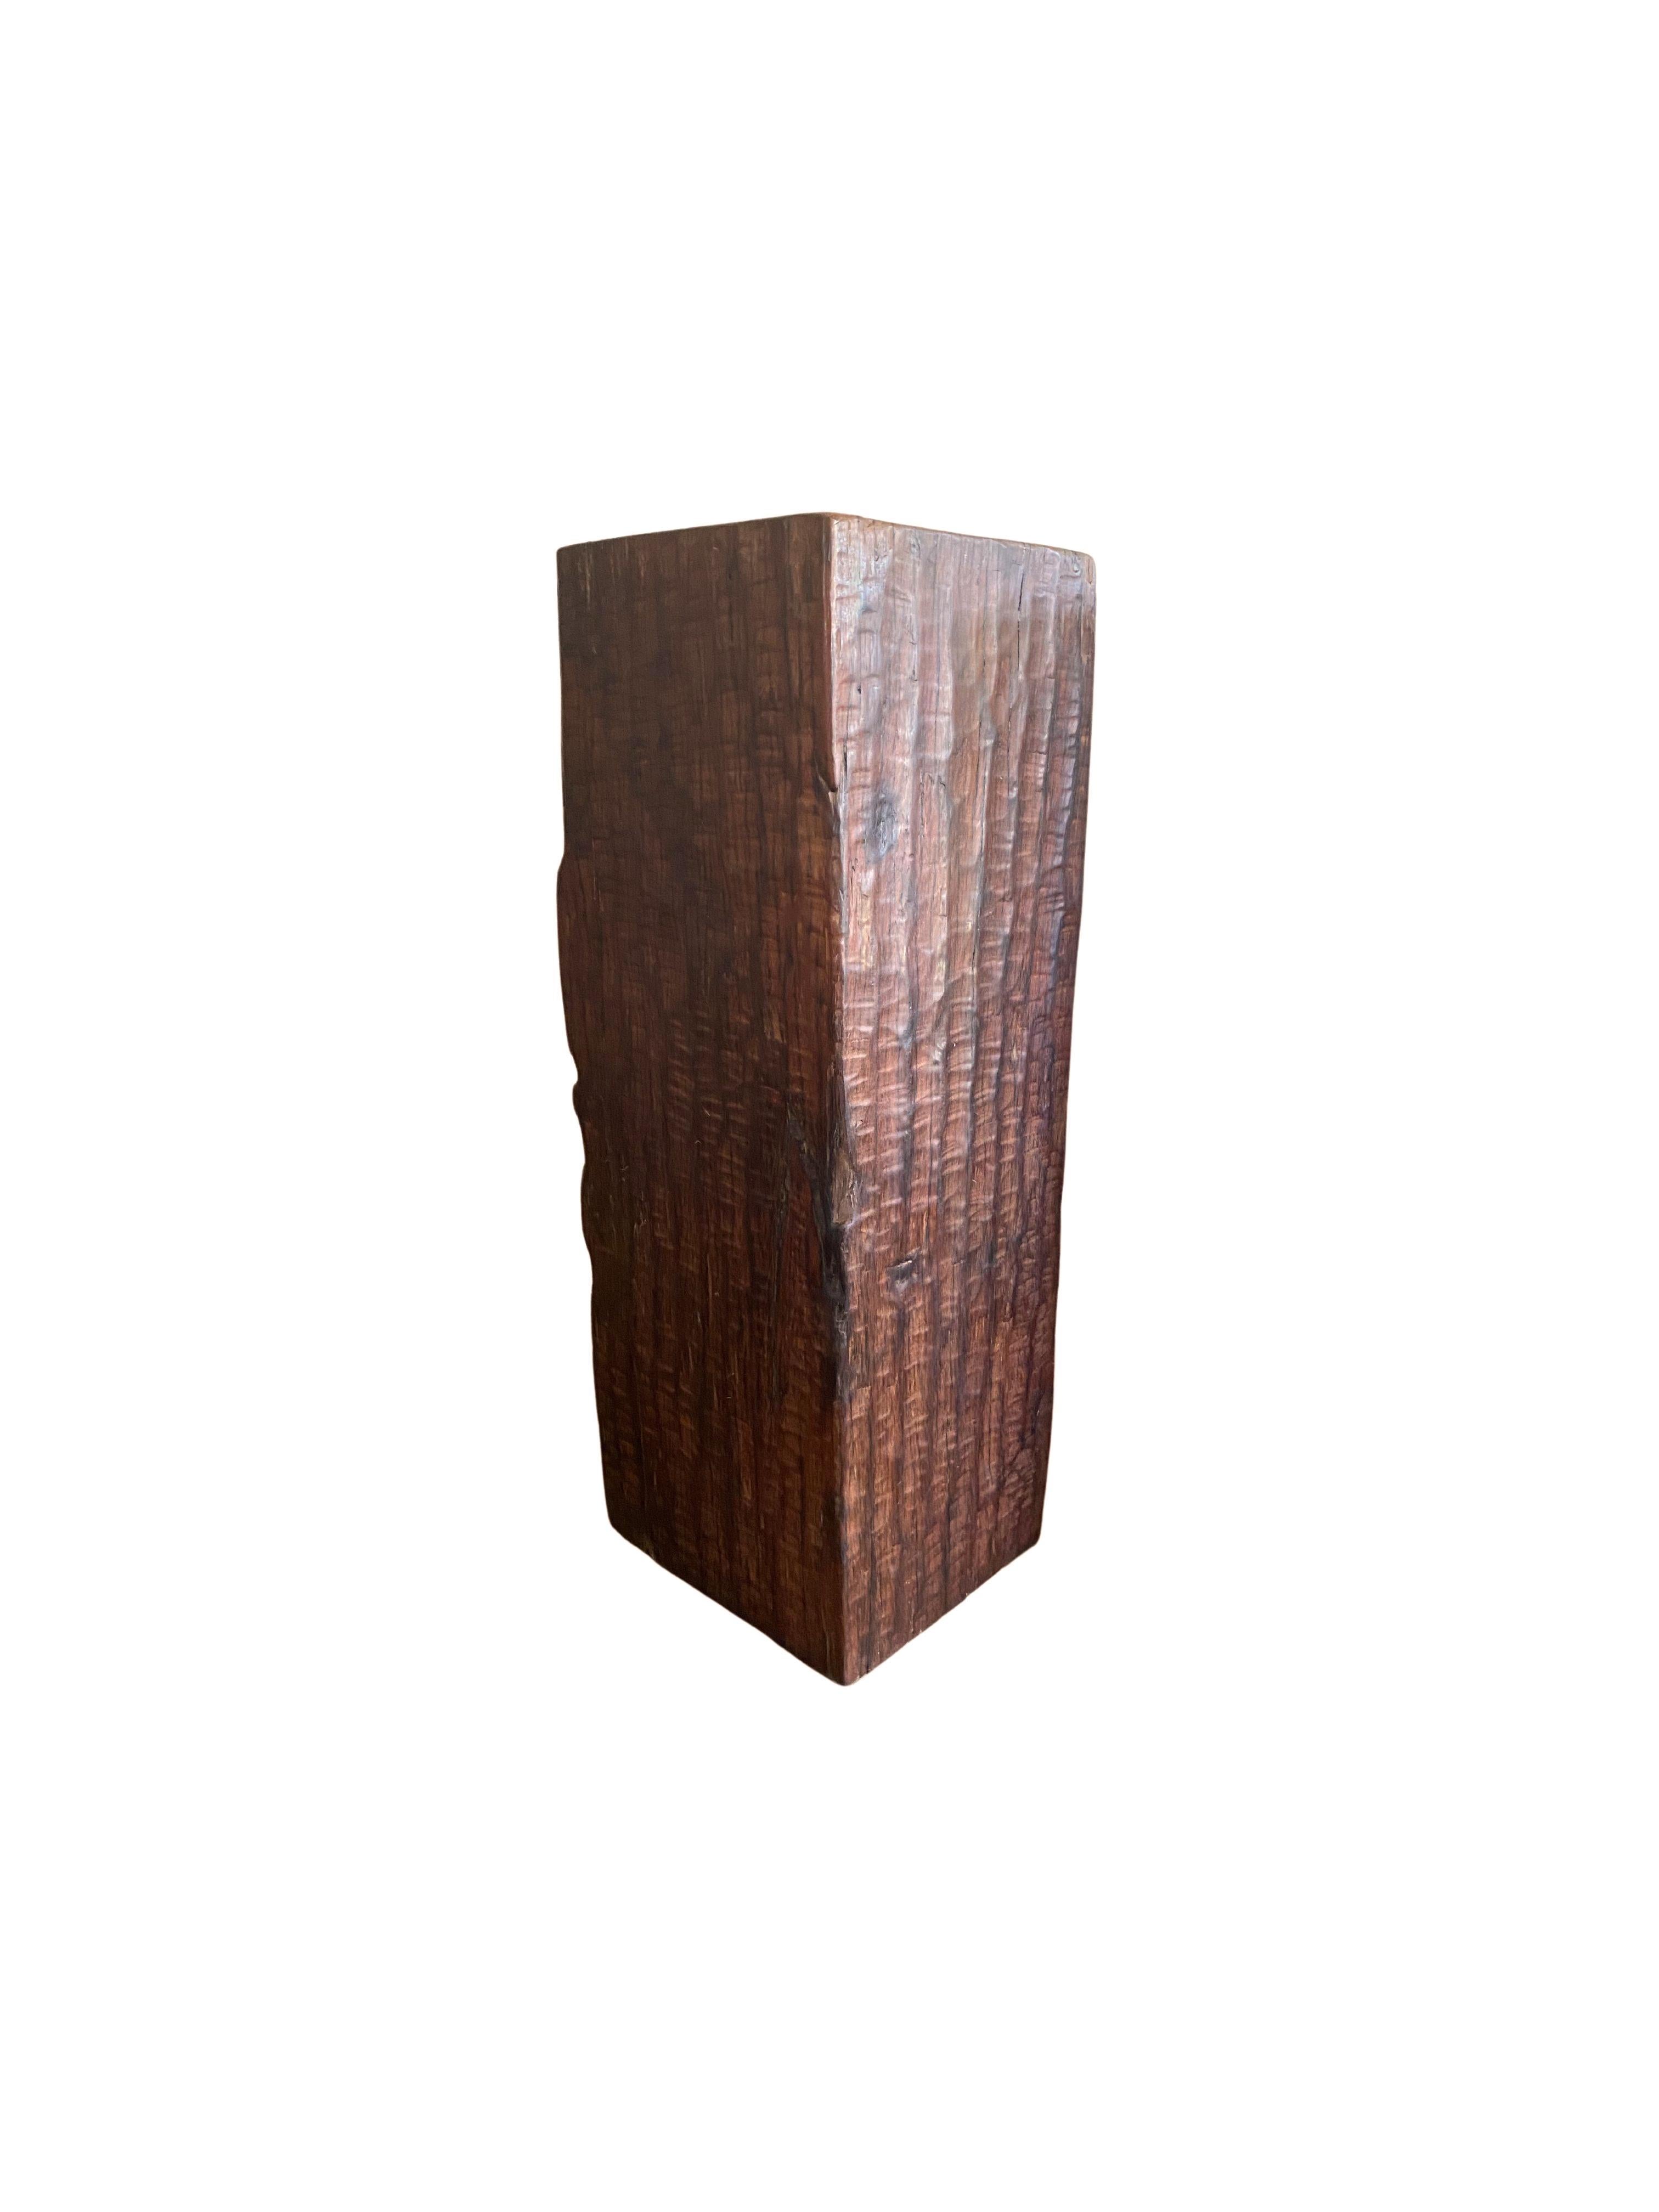 Solid Iron Wood Pedestal with Stunning Wood Texture For Sale 4